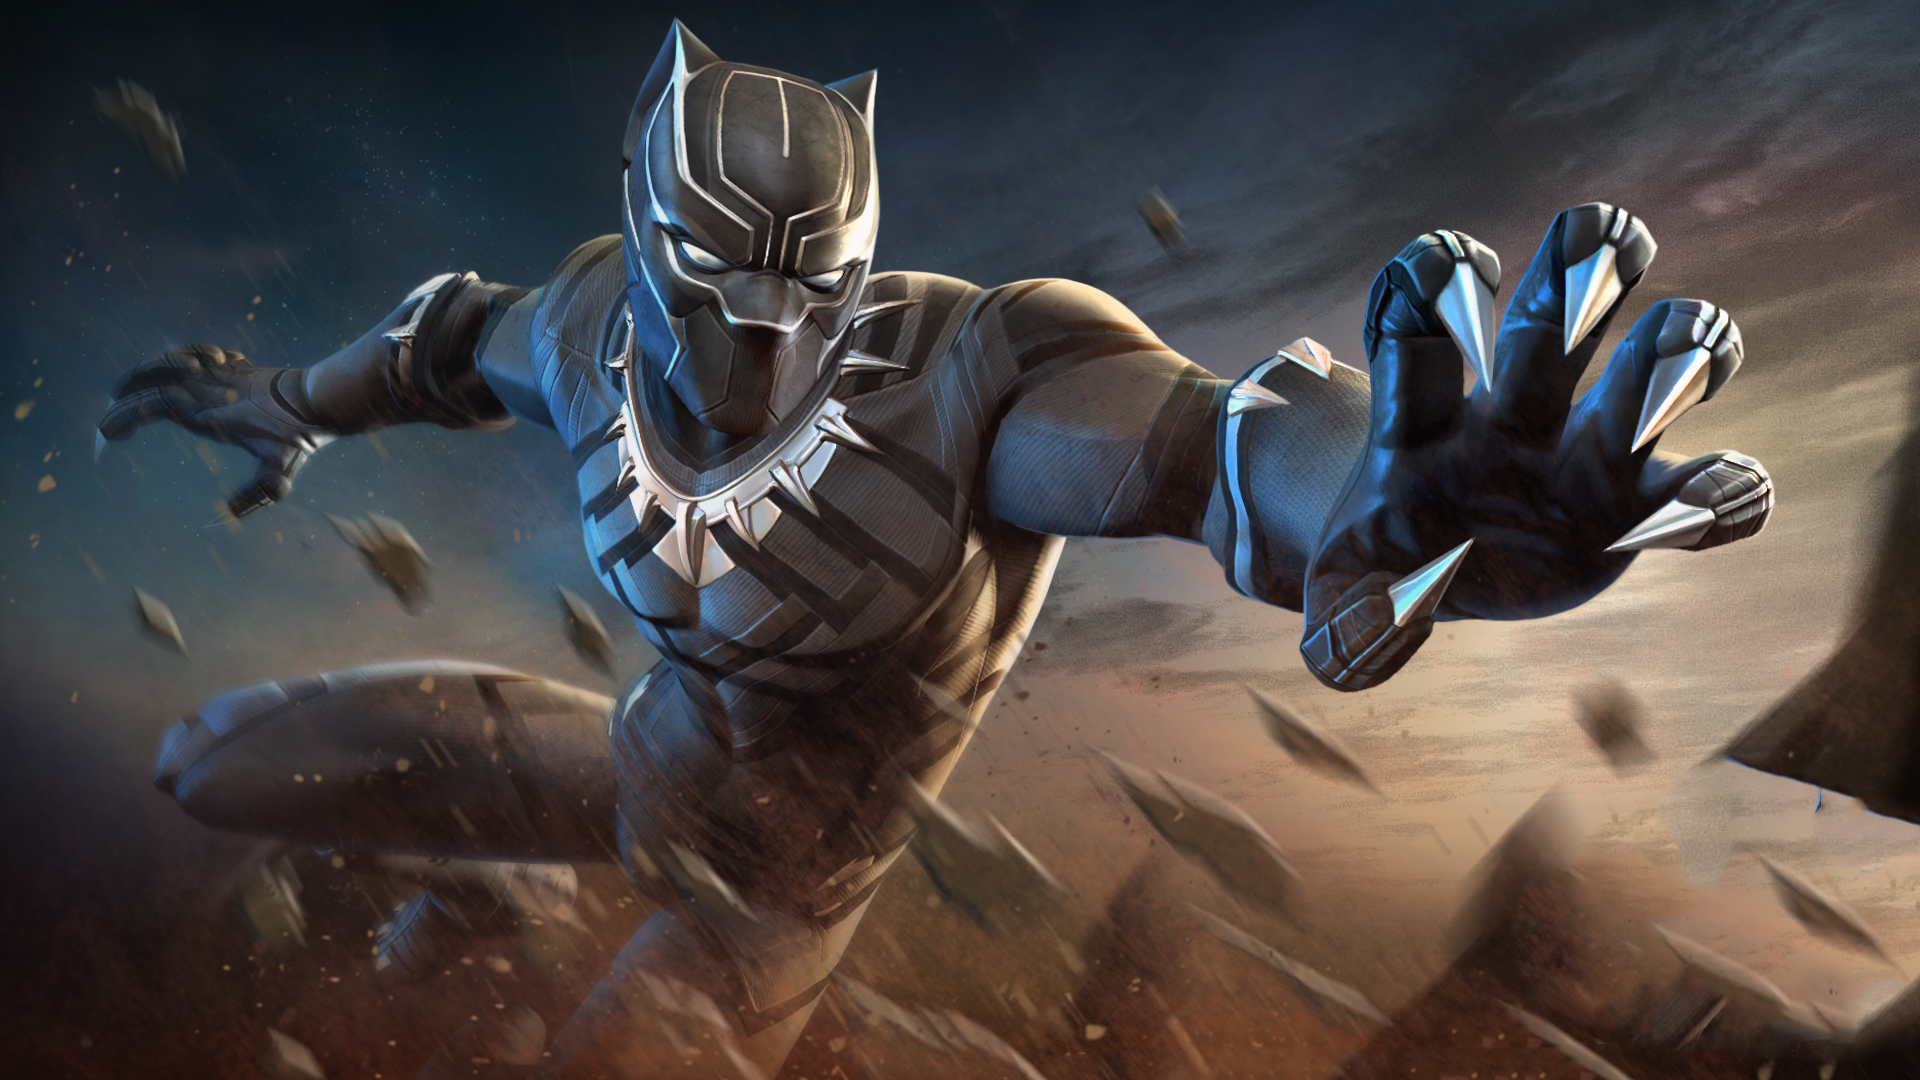 Wallpaper 4k Black Panther Marvel Contest of Champions Wallpaper